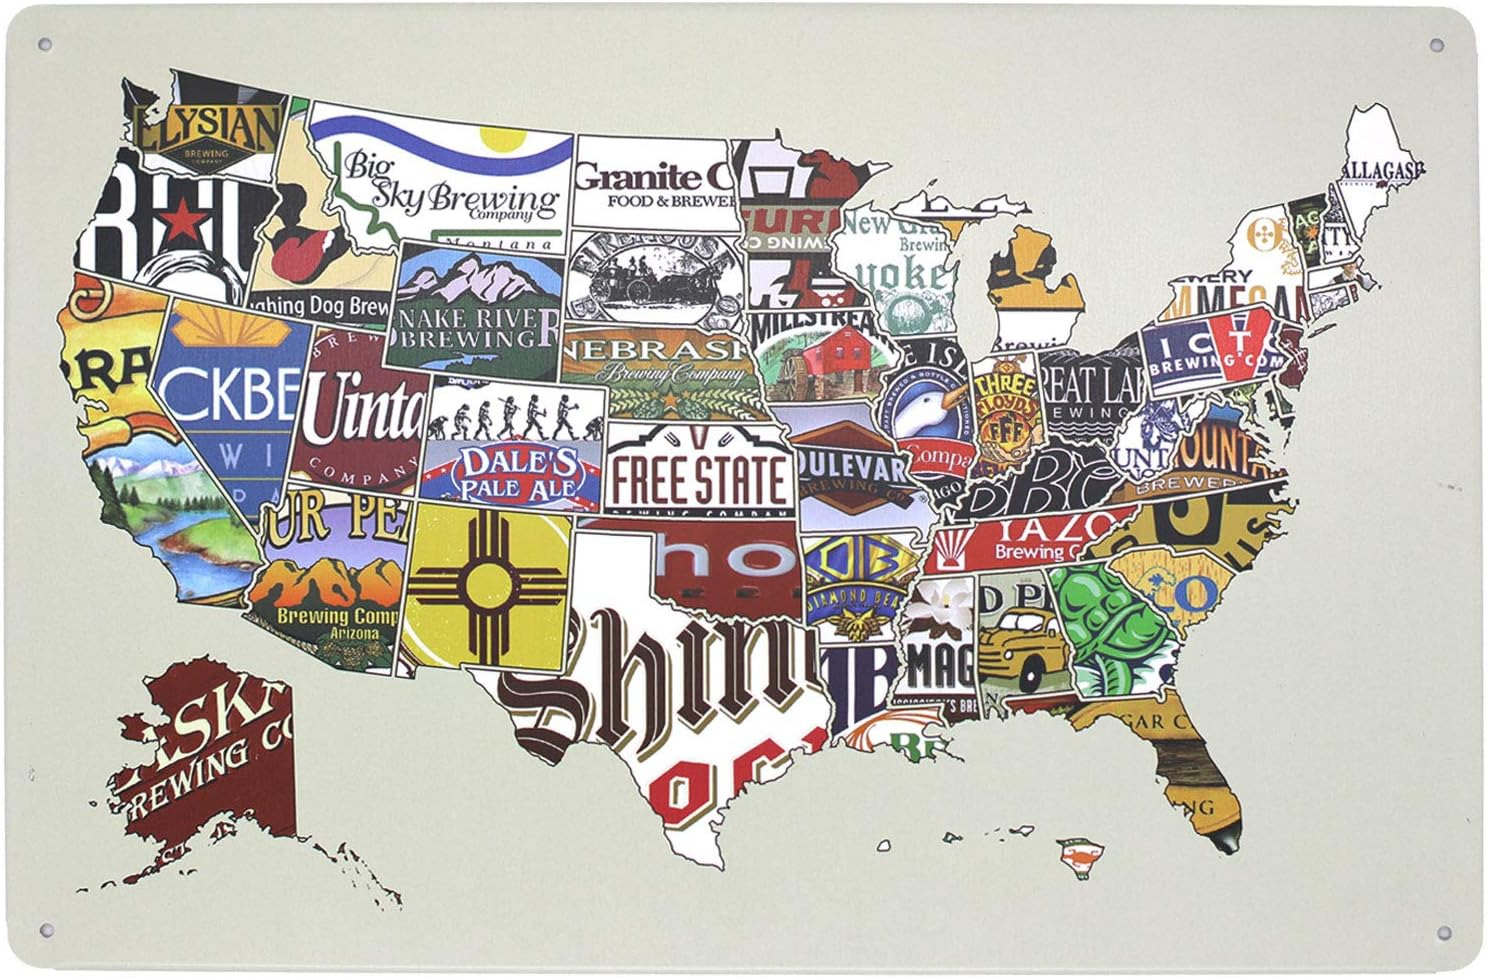 American Craft Beer Week Beer States Map Poster Metal Tin Sign Wall Decor